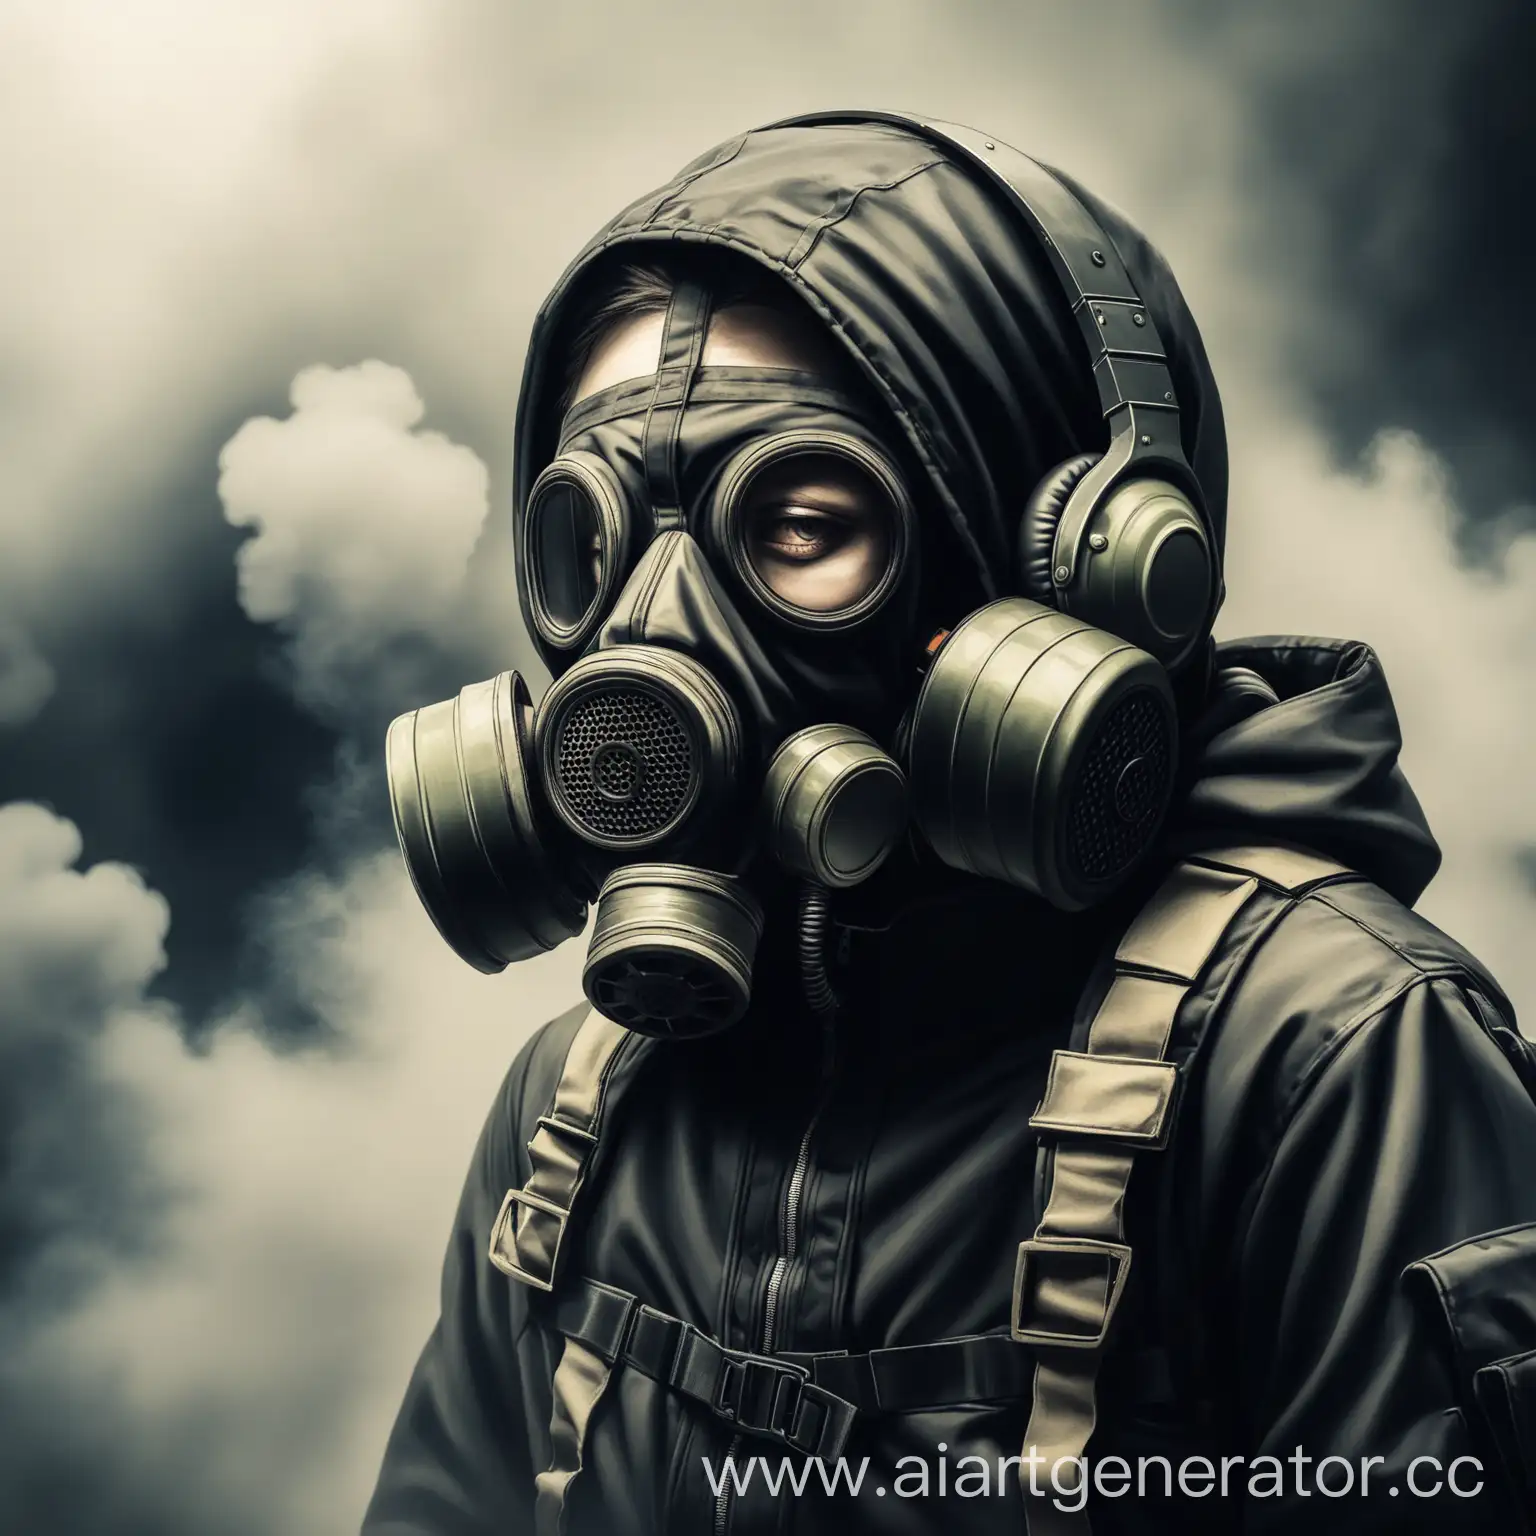 Person-Wearing-Gas-Mask-and-Headphones-in-Urban-Environment